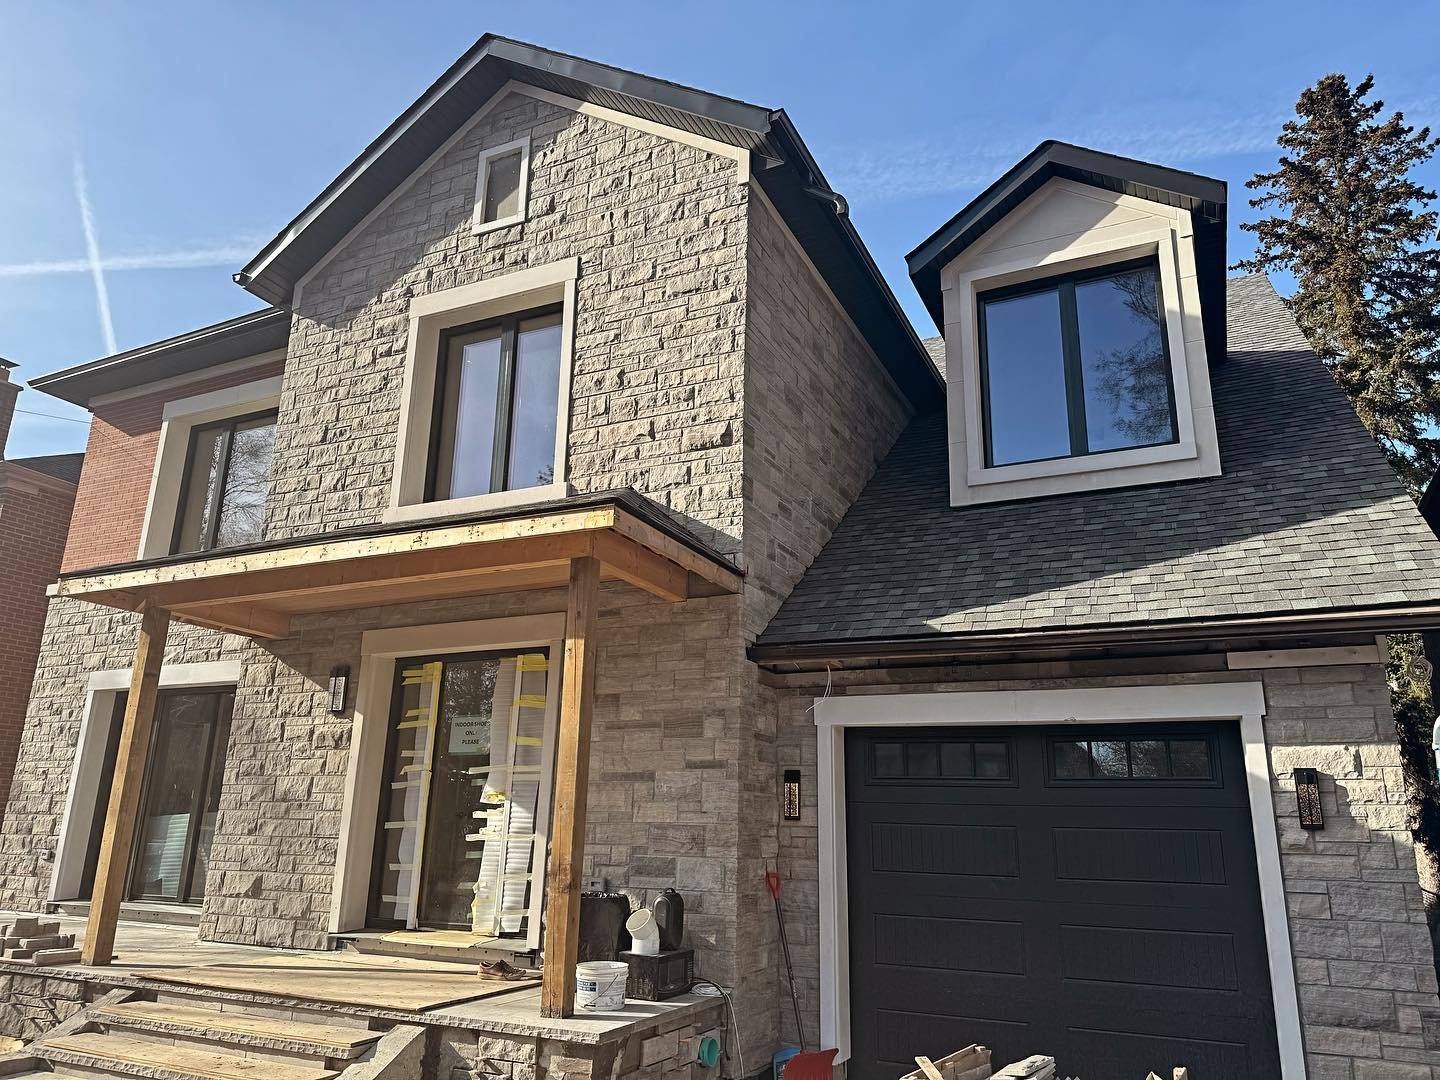 In honour of Earth Day this year, we want to recognize the hard work and dedication of our team and our trades who contributed to building Toronto&rsquo;s first (soon-to-be) certified Passive House. This single family home was constructed to be extre